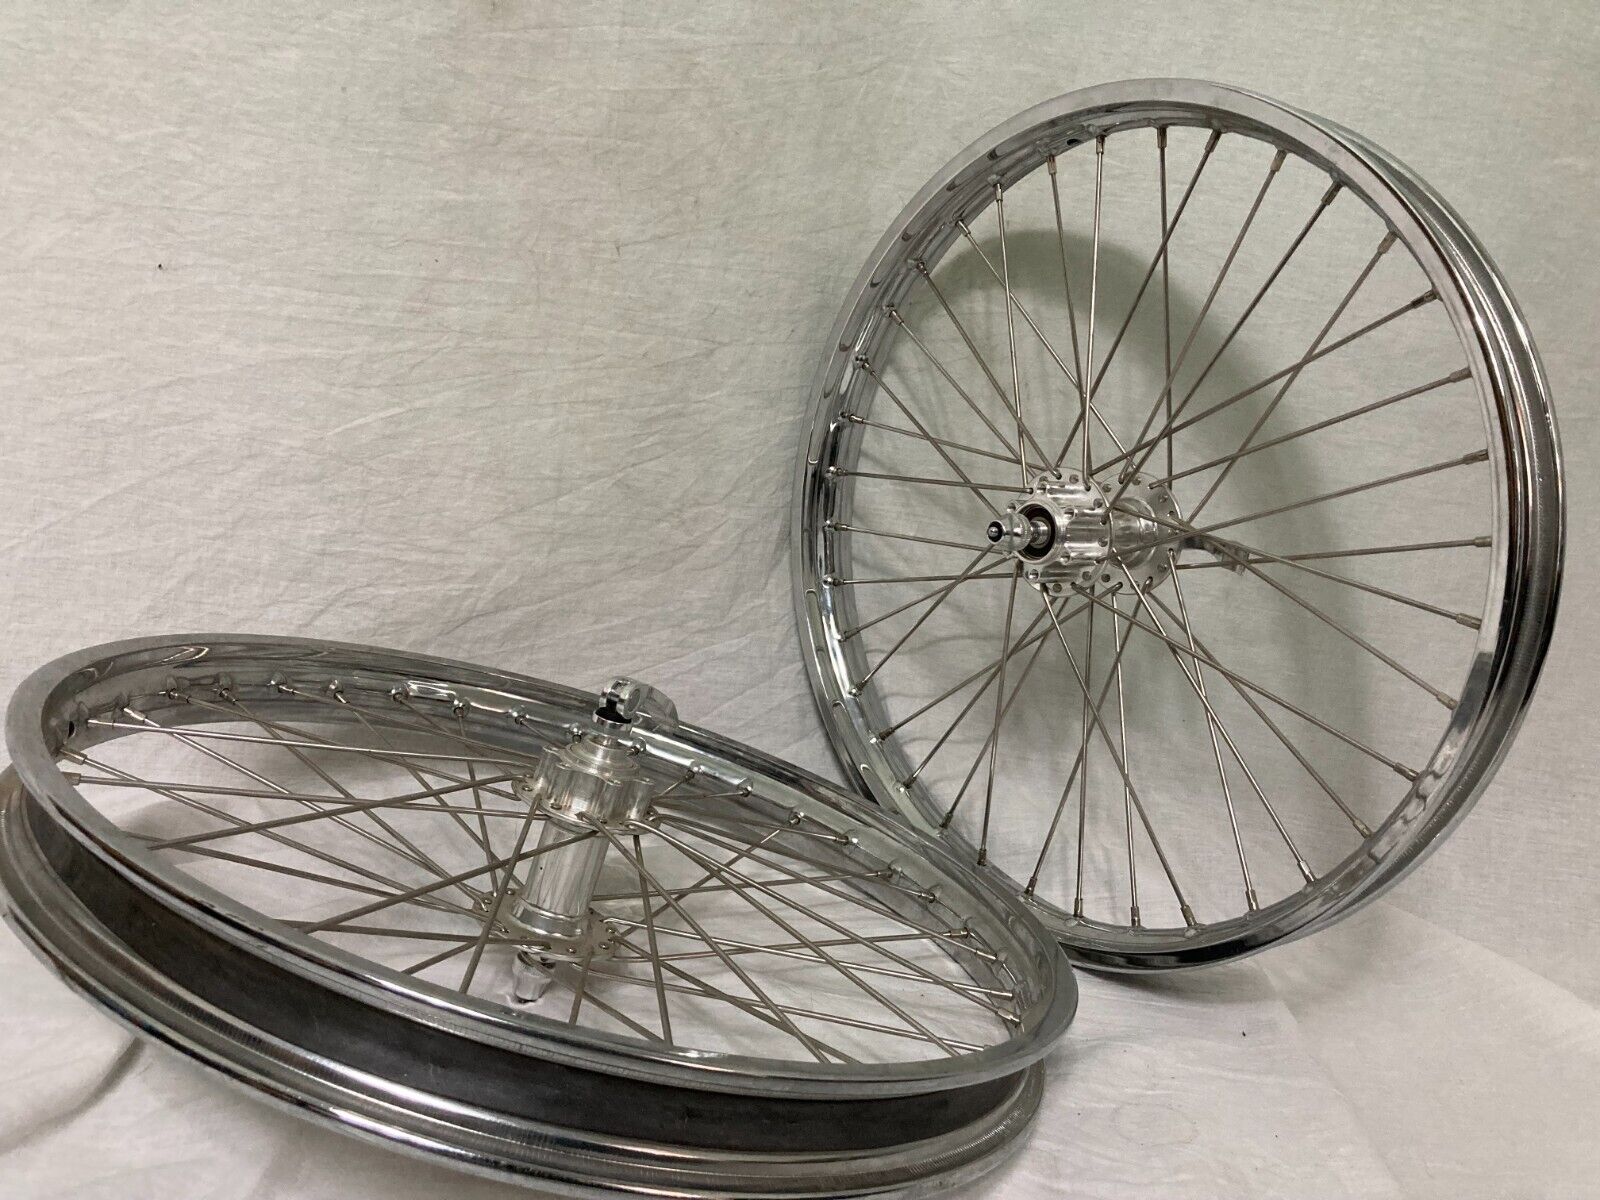 1.2x17 Chrome Plated Rims Motorcycle and Moped replacement Rims